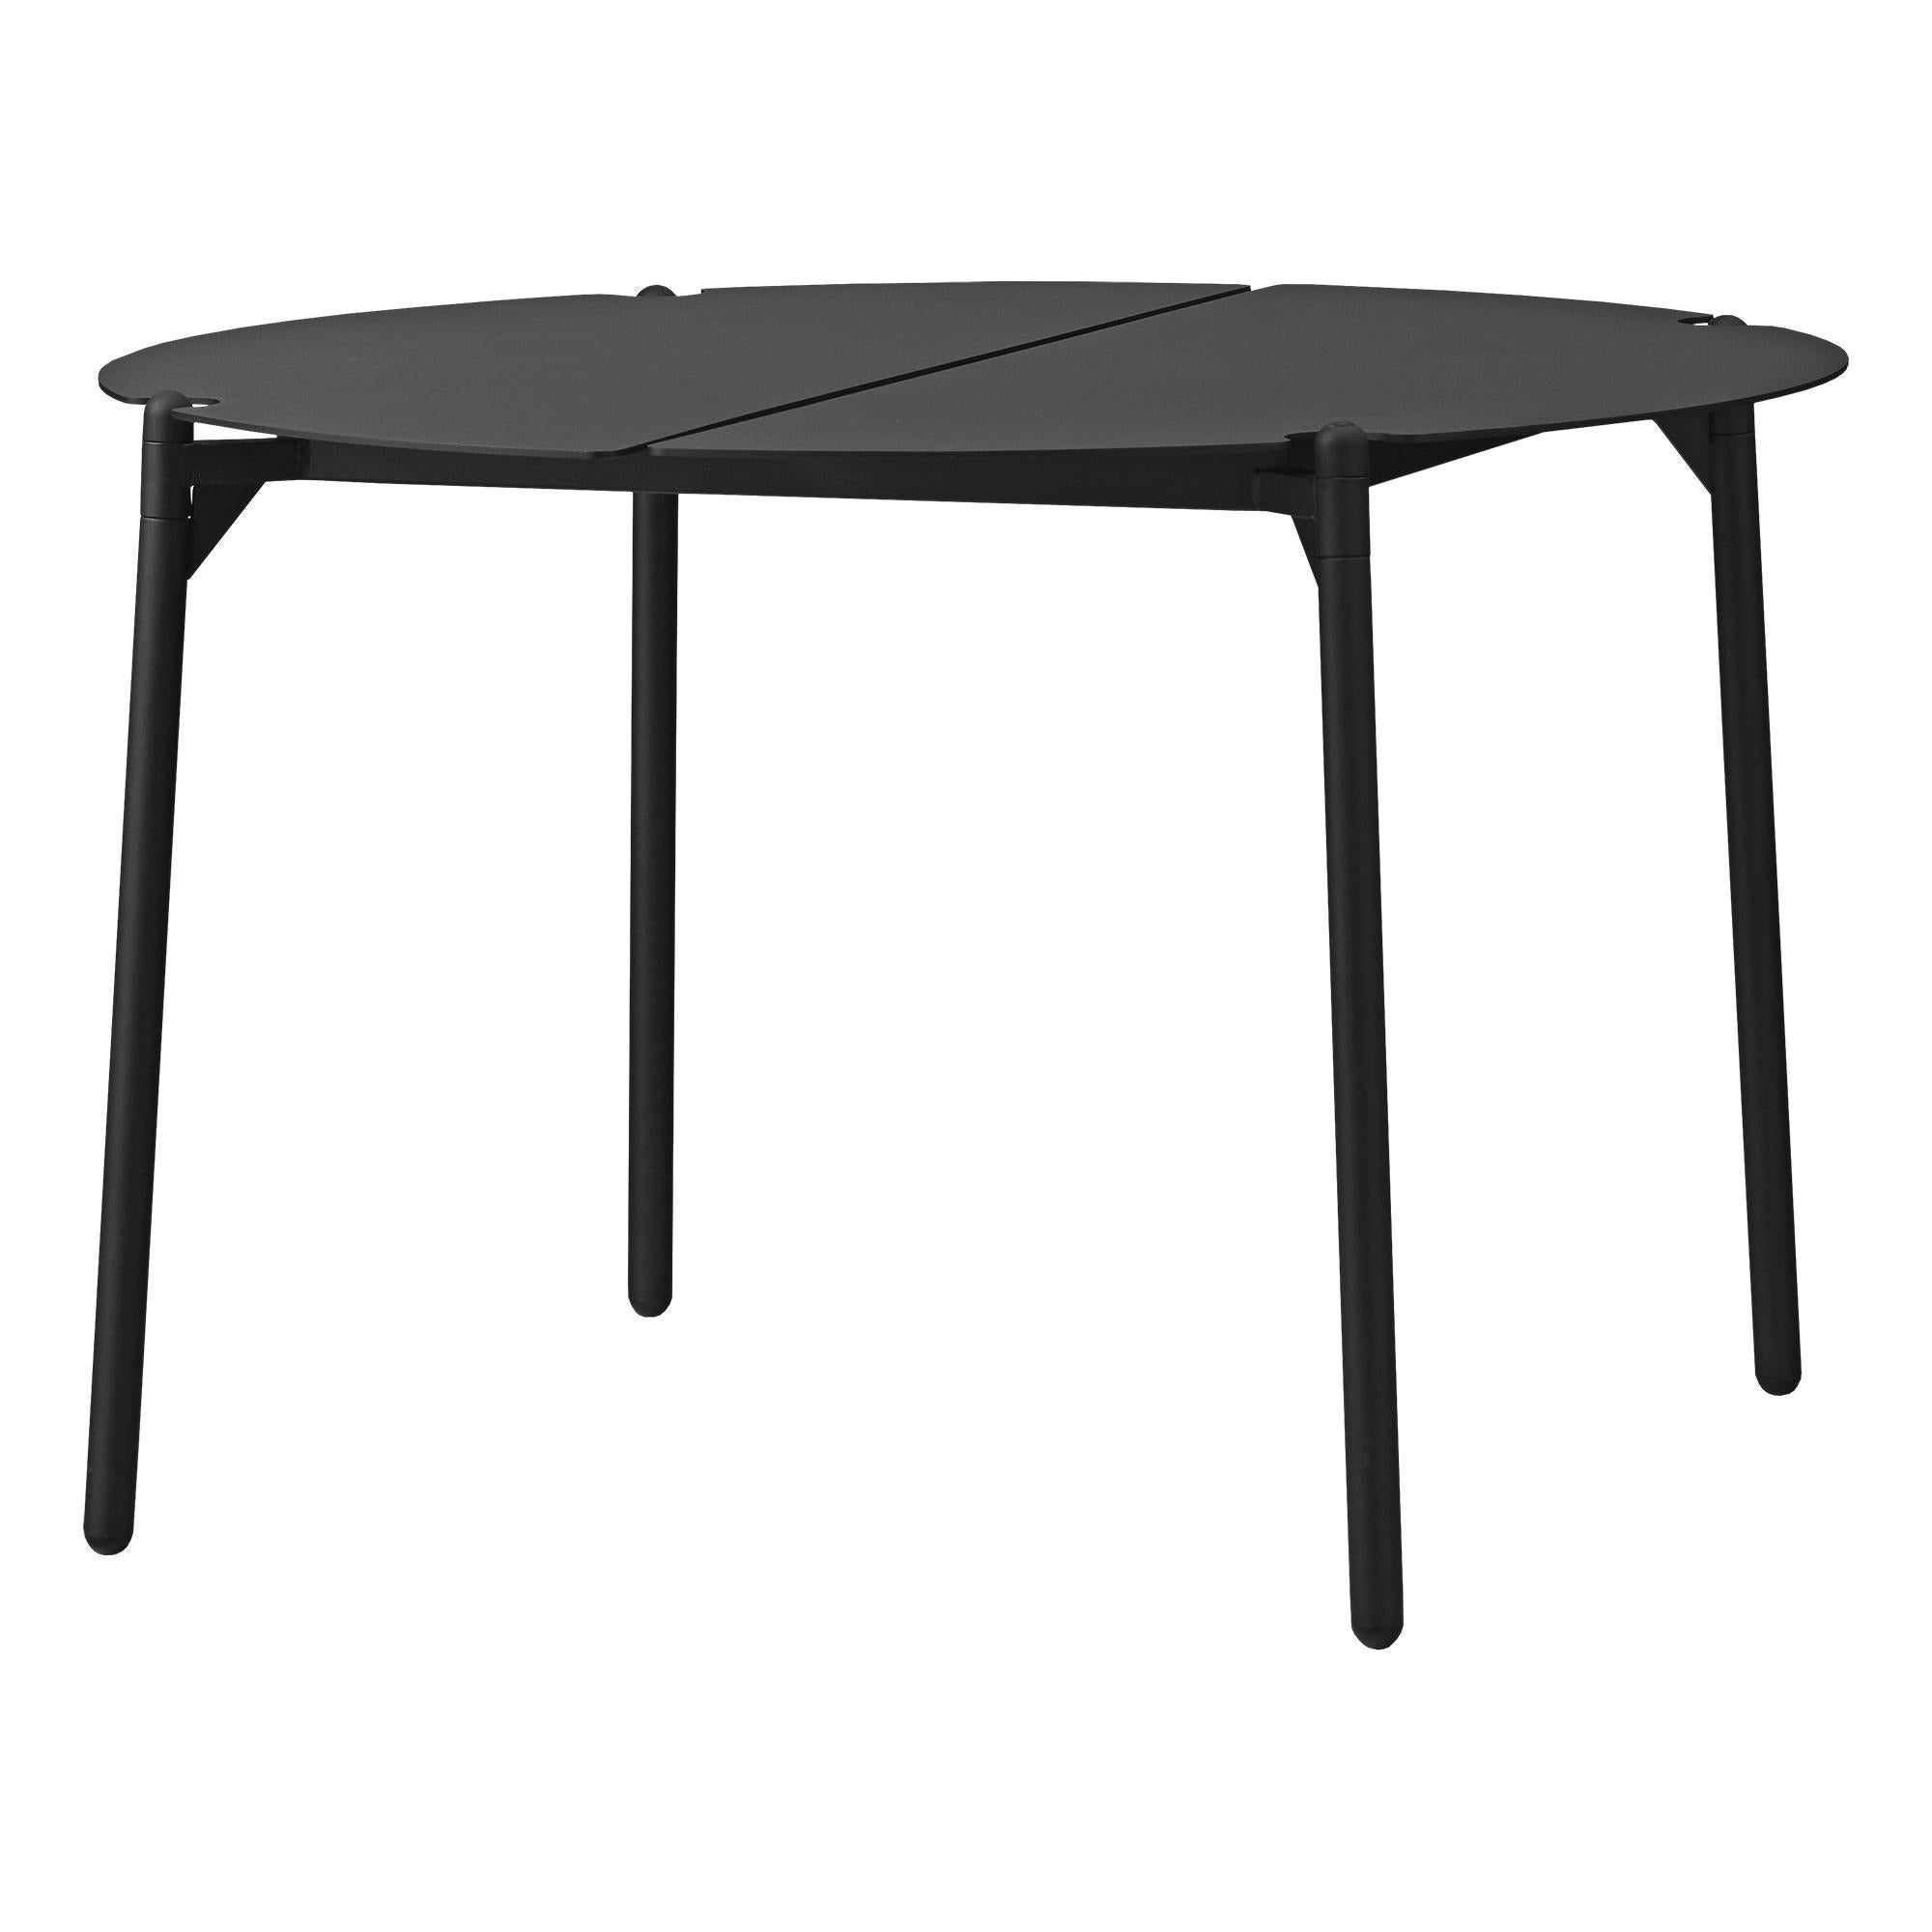 Large black Minimalist lounge table
Dimensions: Diameter 70 x Height 45 cm 
Materials: Steel w. Matte powder coating & aluminum w. Matte powder coating.
Available in colors: Taupe, bordeaux, forest, ginger bread, black and, black and